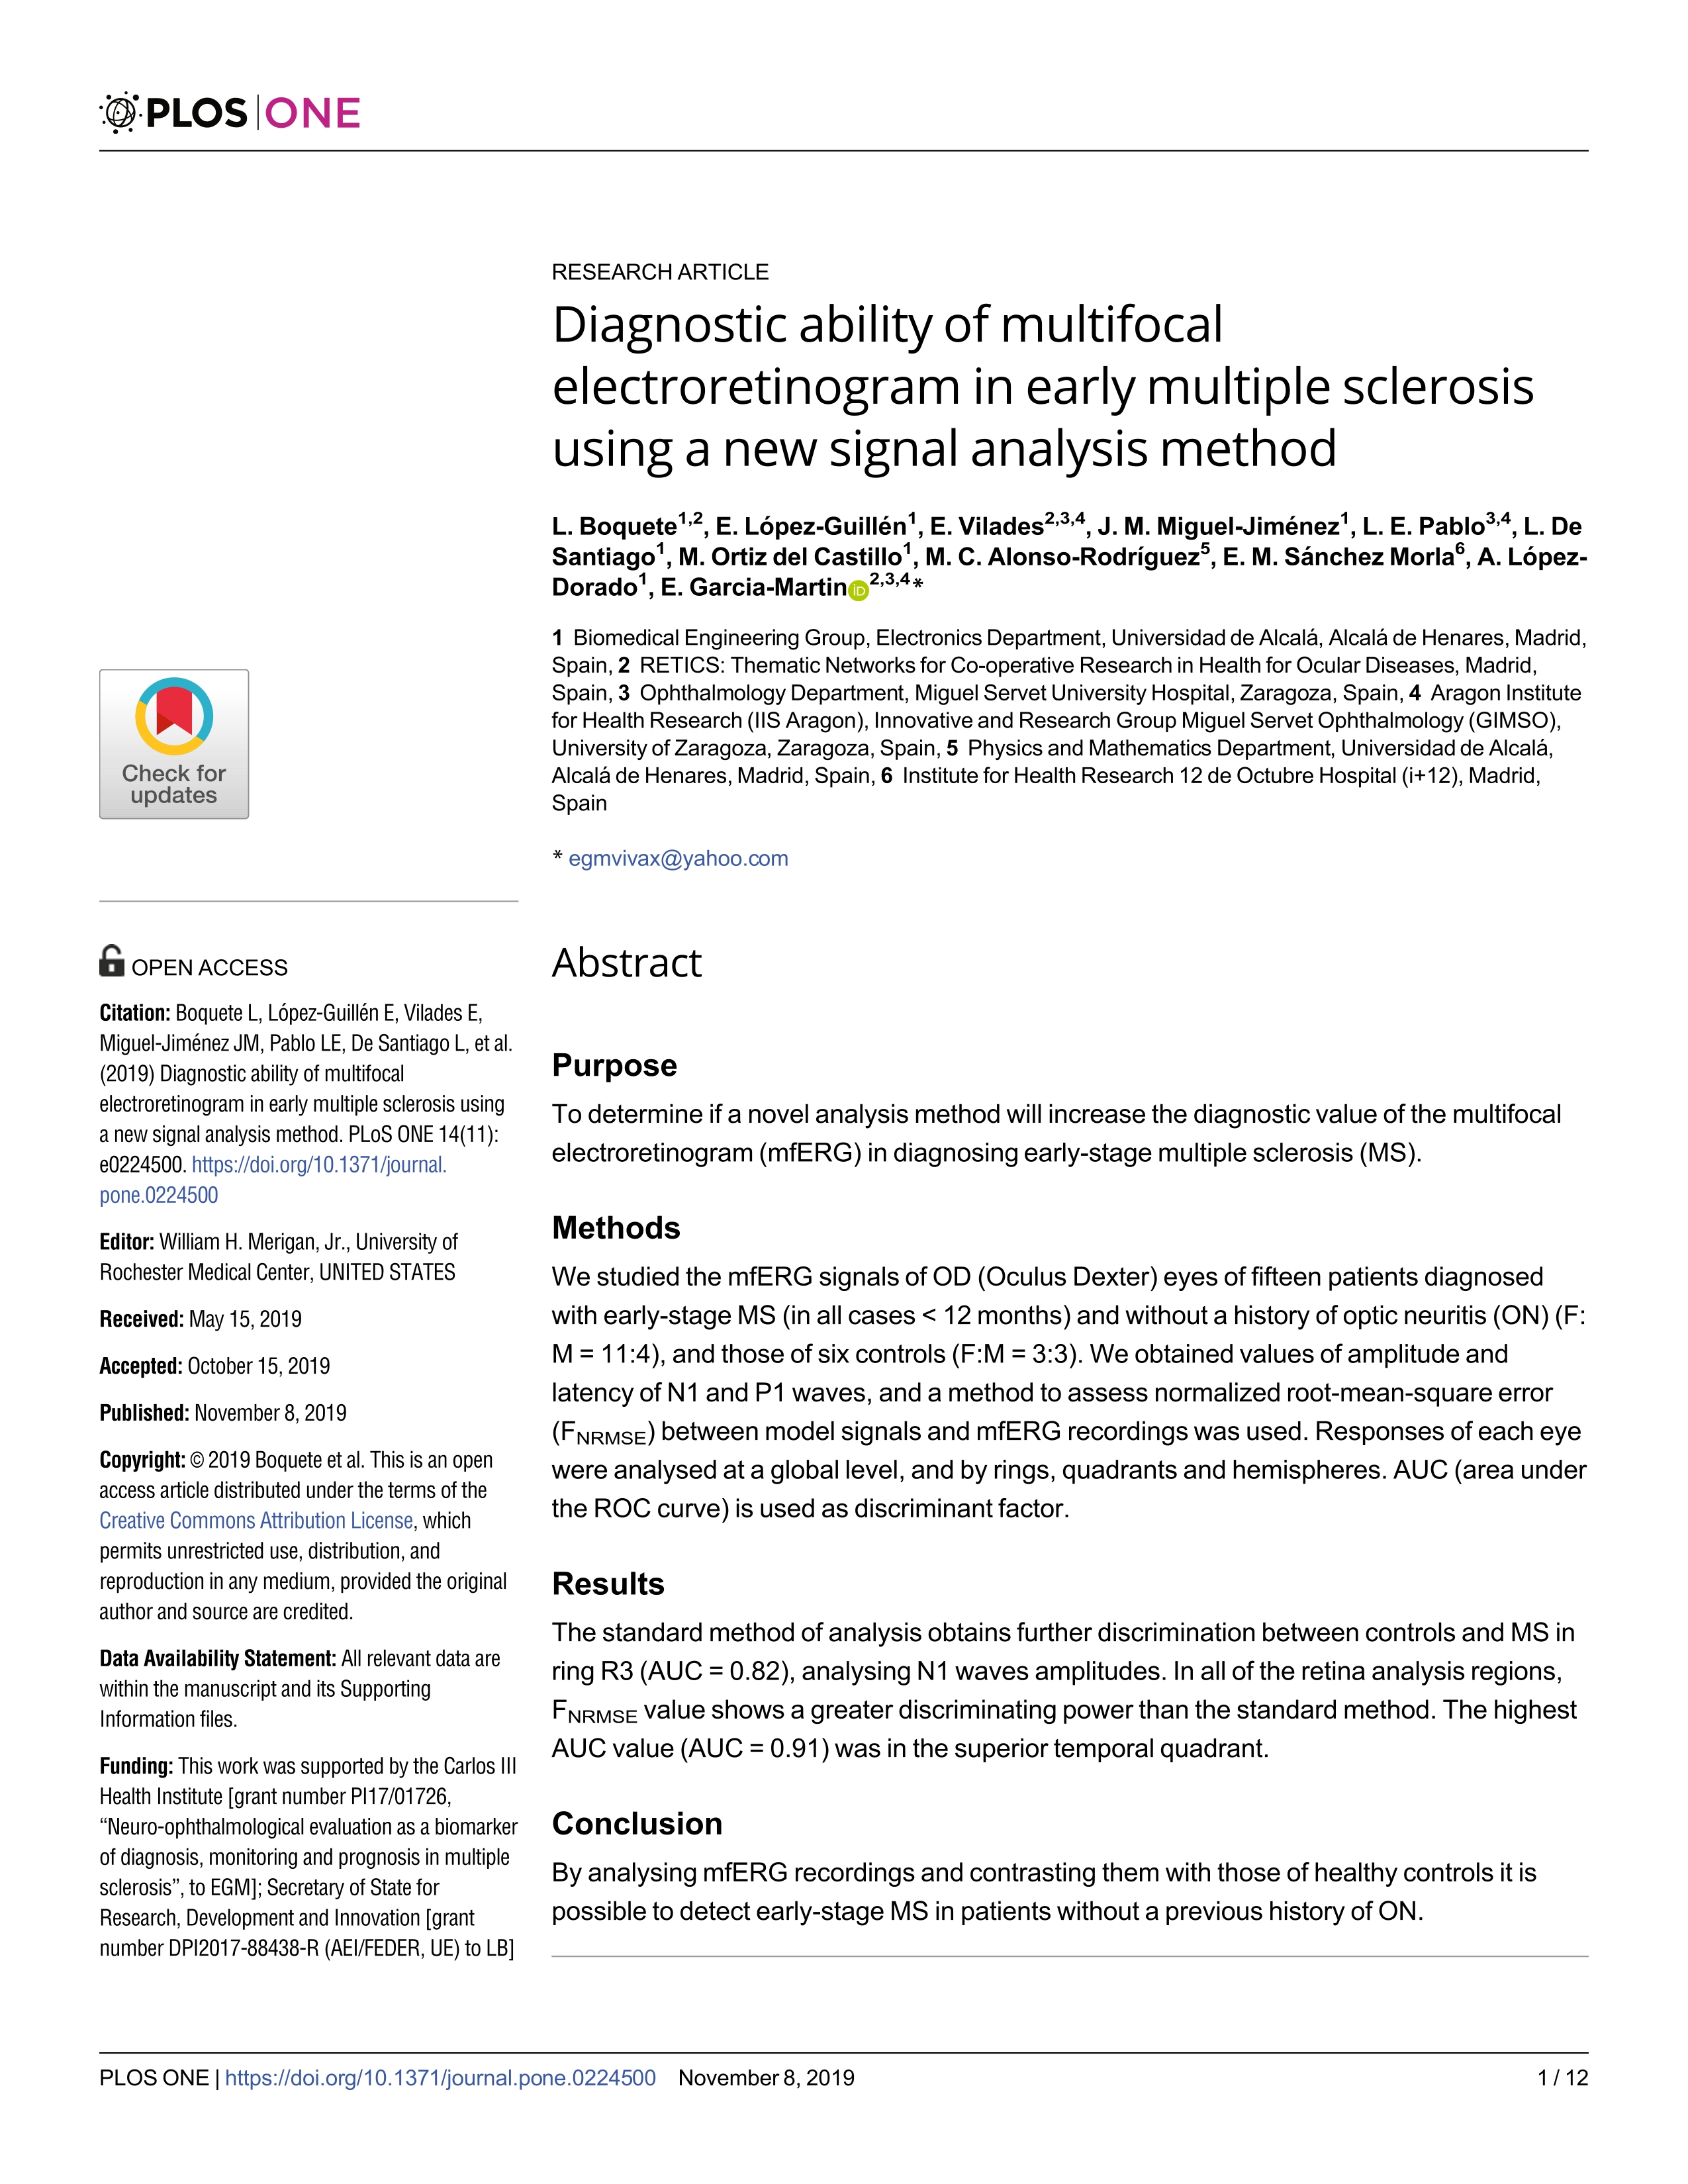 Diagnostic ability of multifocal electroretinogram in early multiple sclerosis using a new signal analysis method